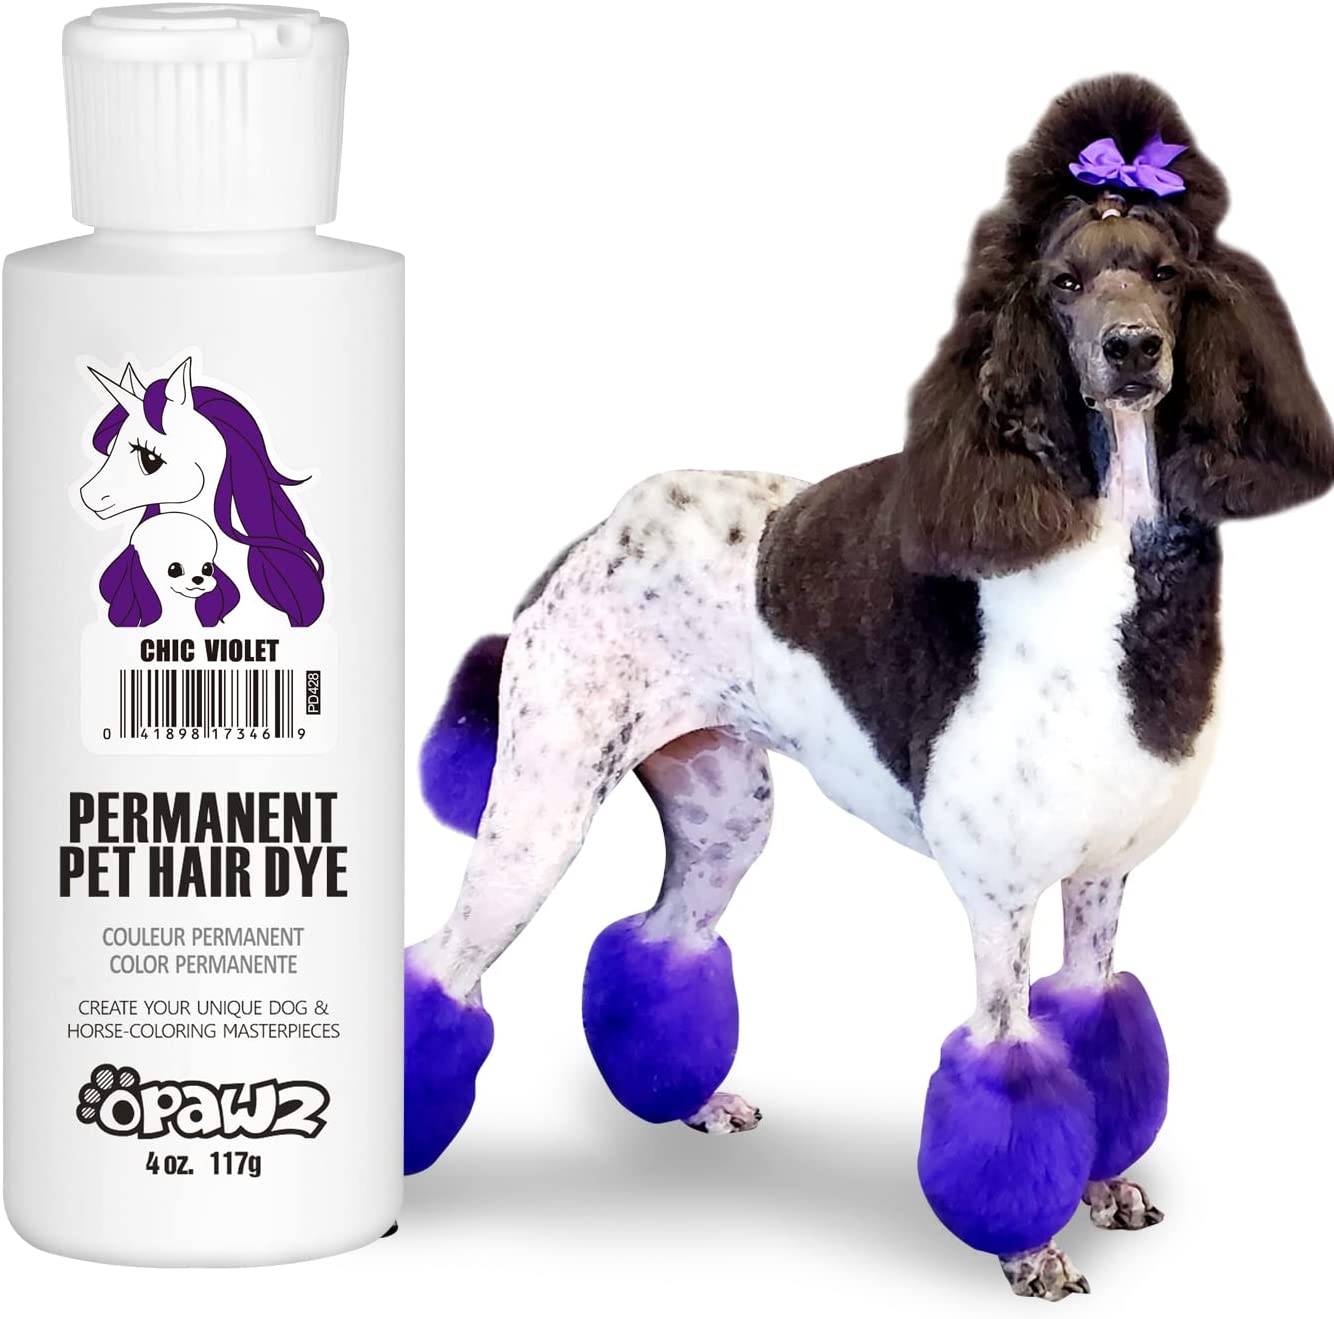 OPAWZ Permanent Dog Hair Dye, Pet Hair Dye Safely Used by Grooming Salons for a Decade, Pet Safe Dye Lasts Over 20 Washes, Bright Color for Dogs and Horses (Chic Violet)